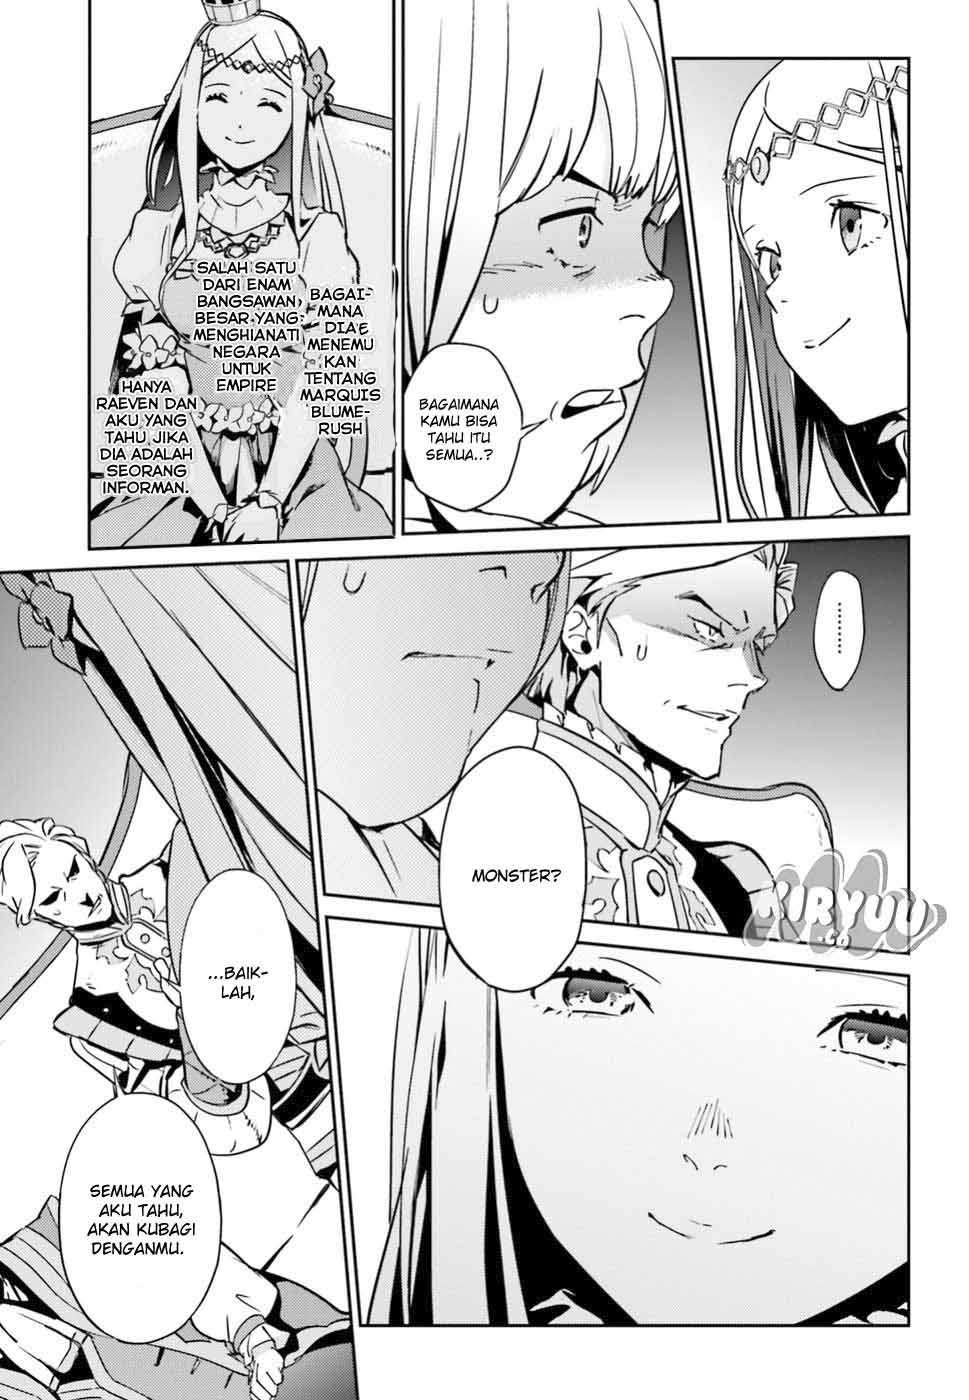 Overlord Chapter 41 12